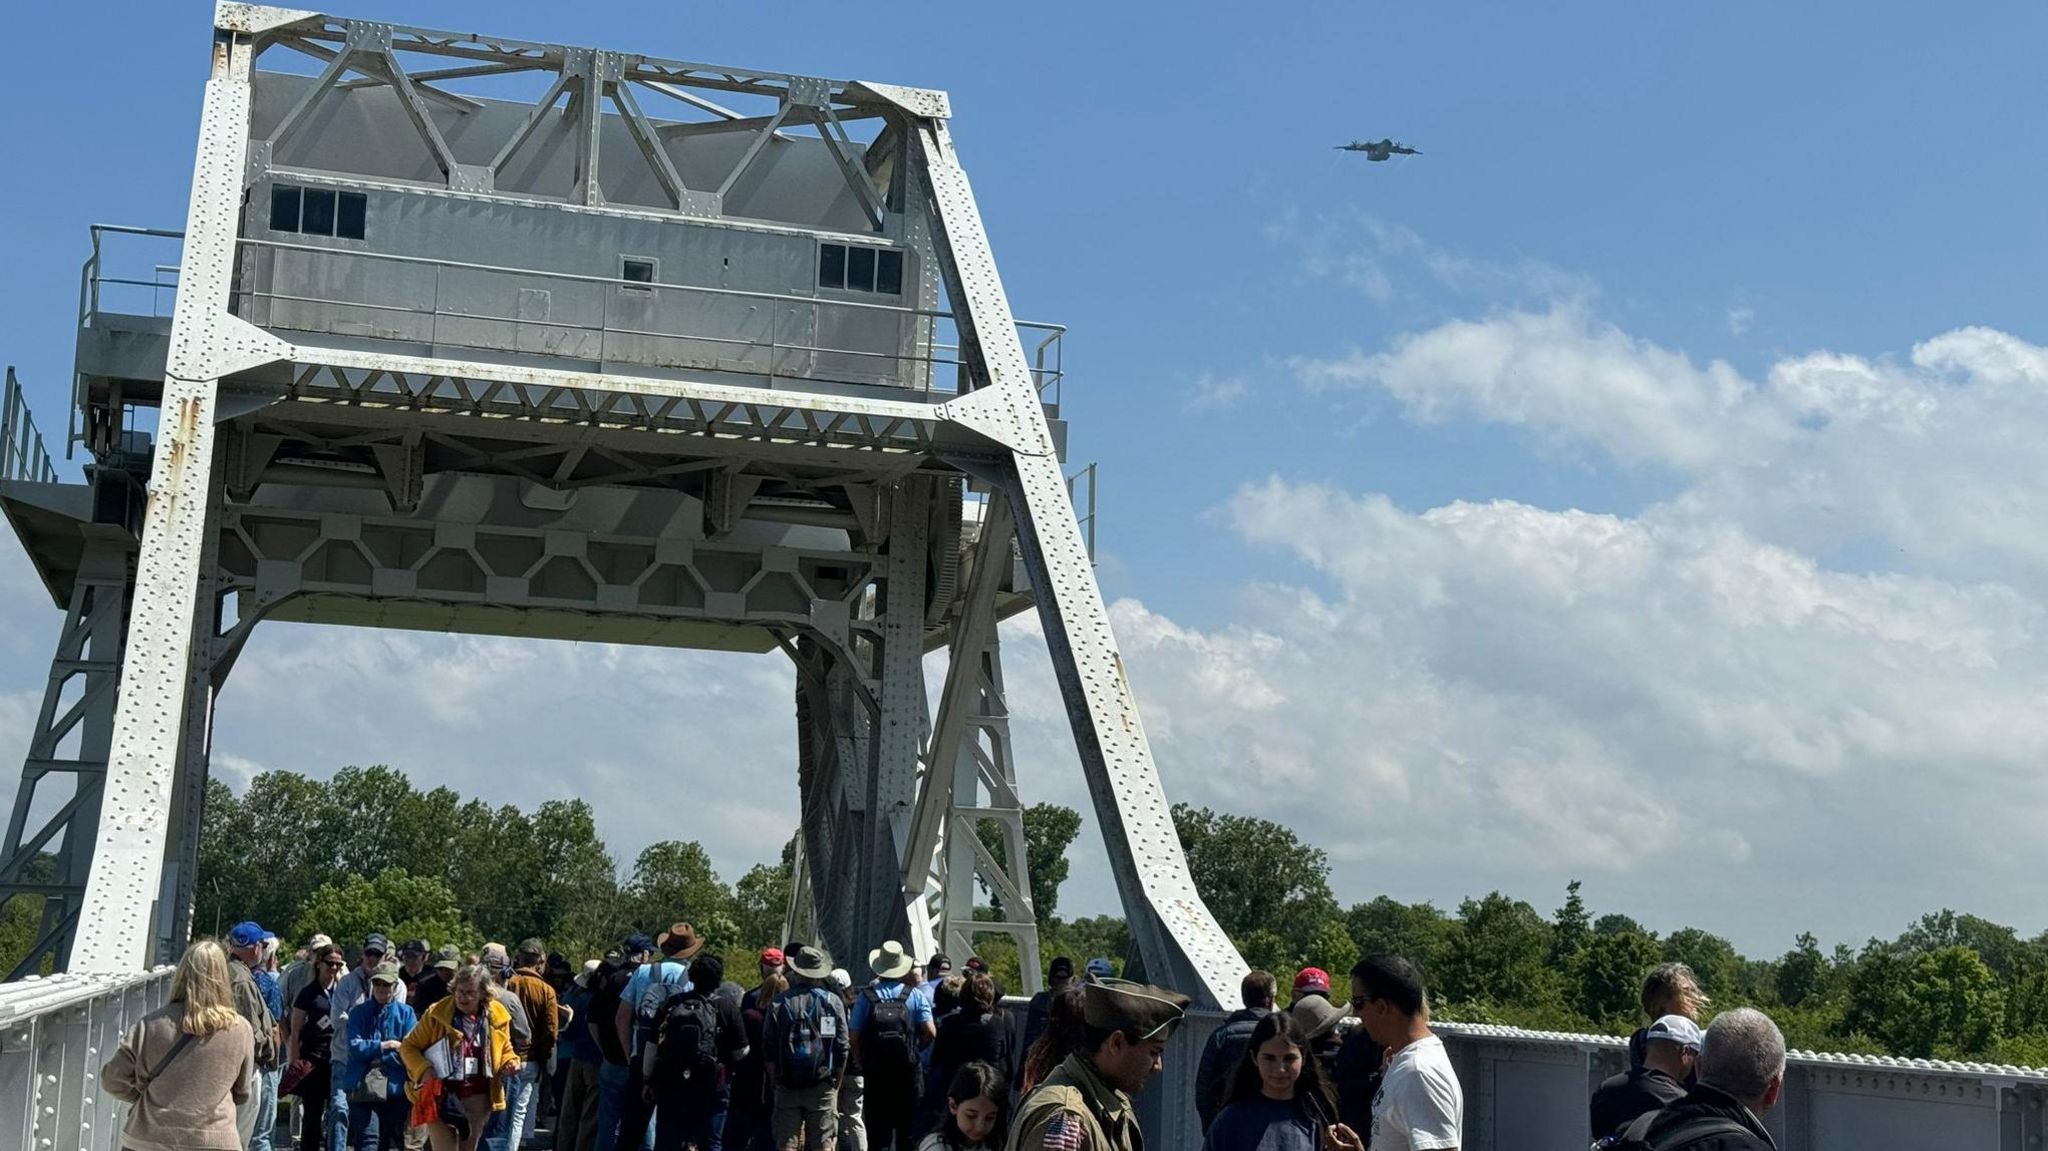 A military aircraft in the distance flying past a bridge full of people